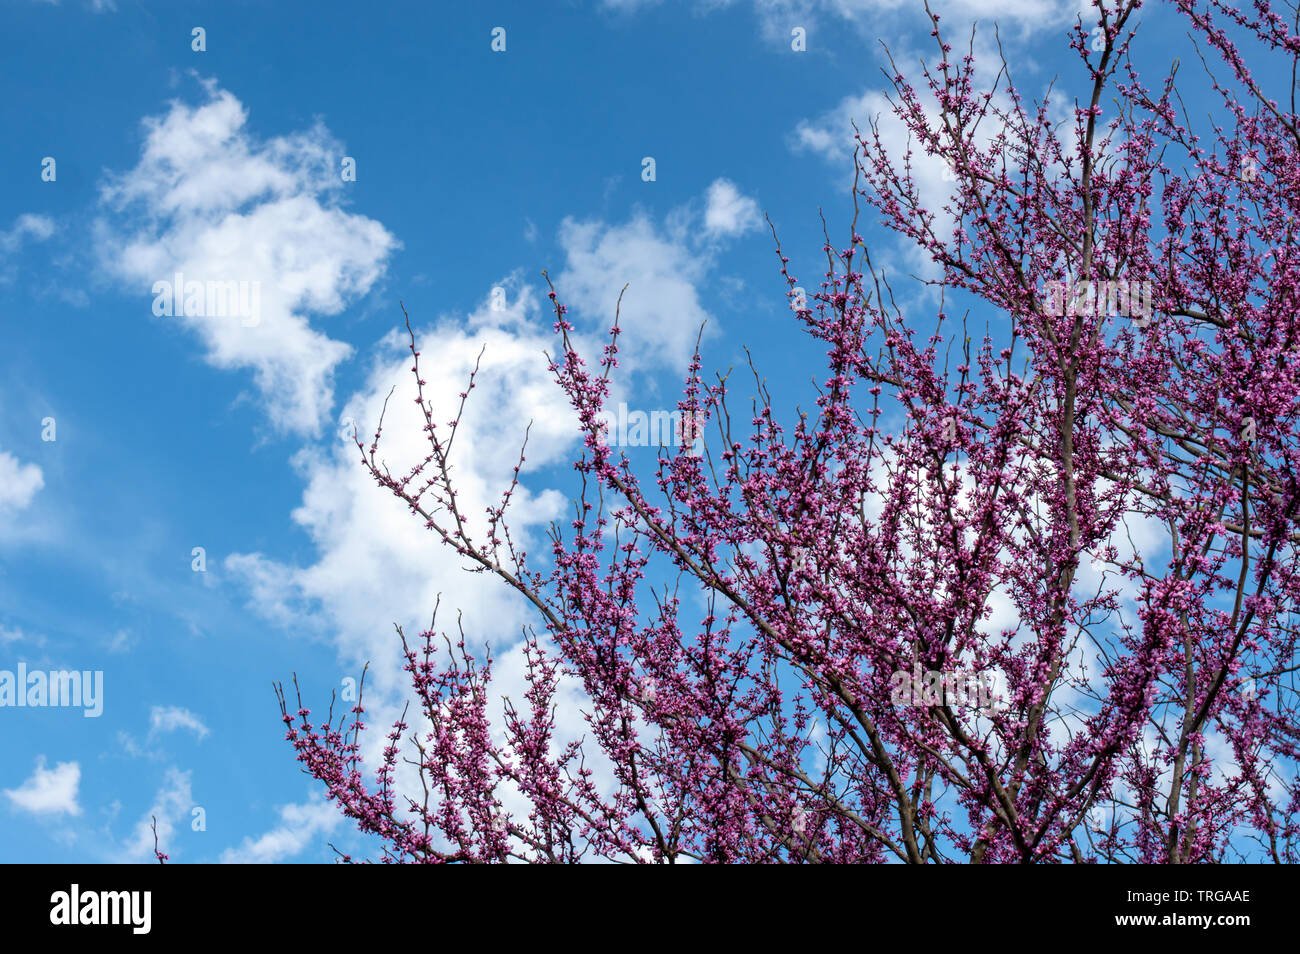 Blue sky, white clouds and magenta colored blooms on a redbud tree makes a beautiful scene in southwest Missouri. Stock Photo